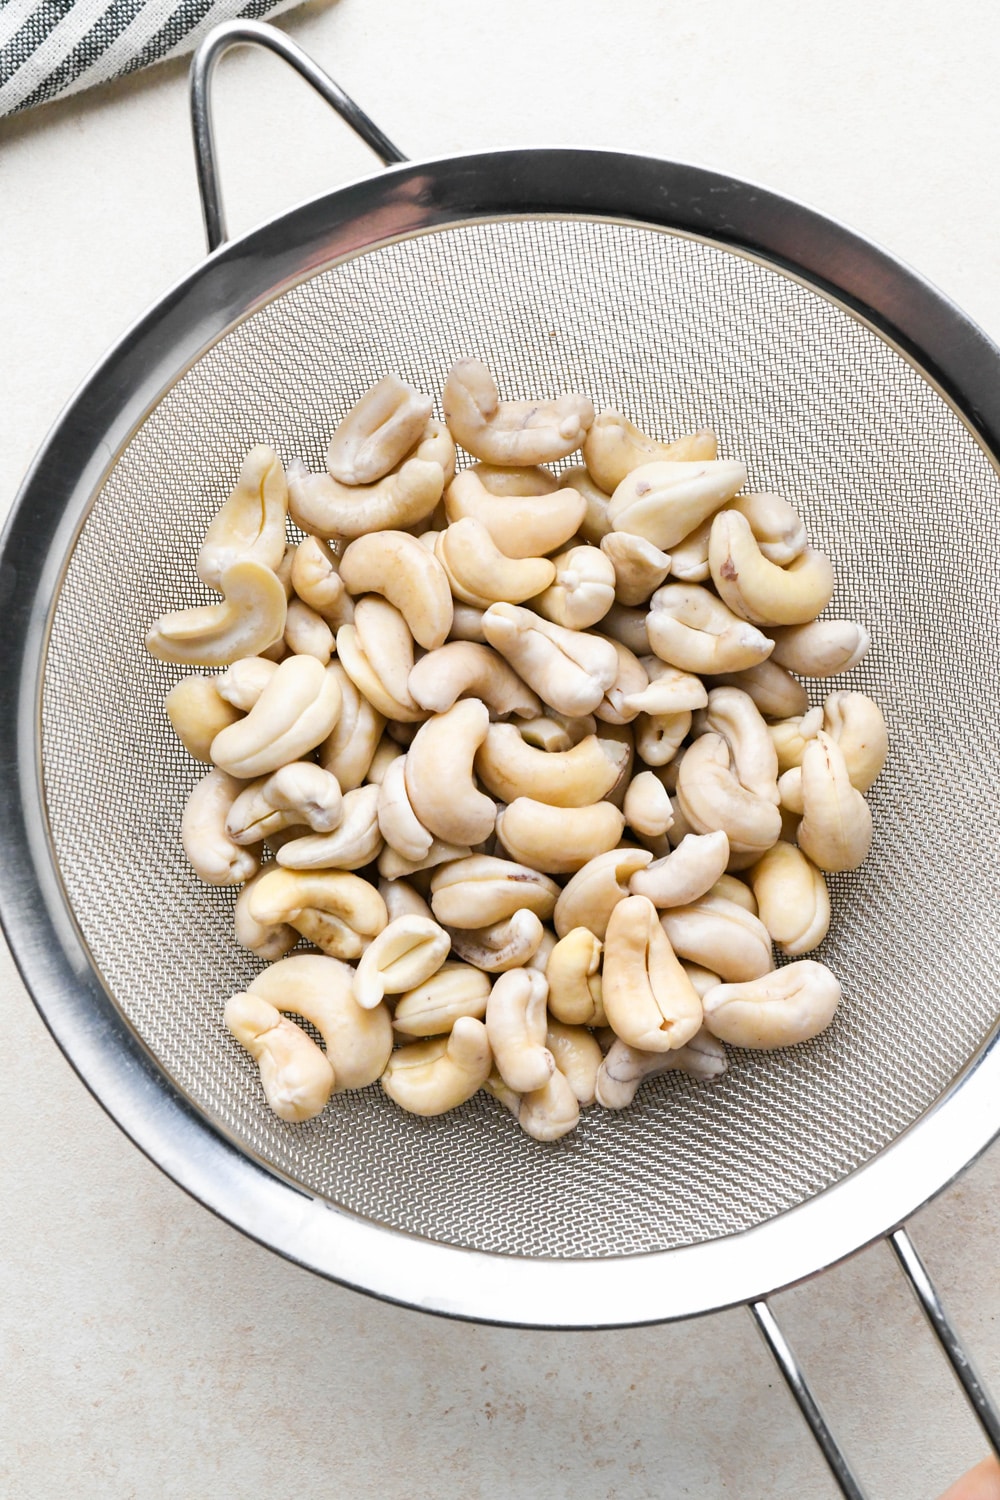 How to make cashew queso: Soaked cashews in a strainer to show the pale color and plump texture.